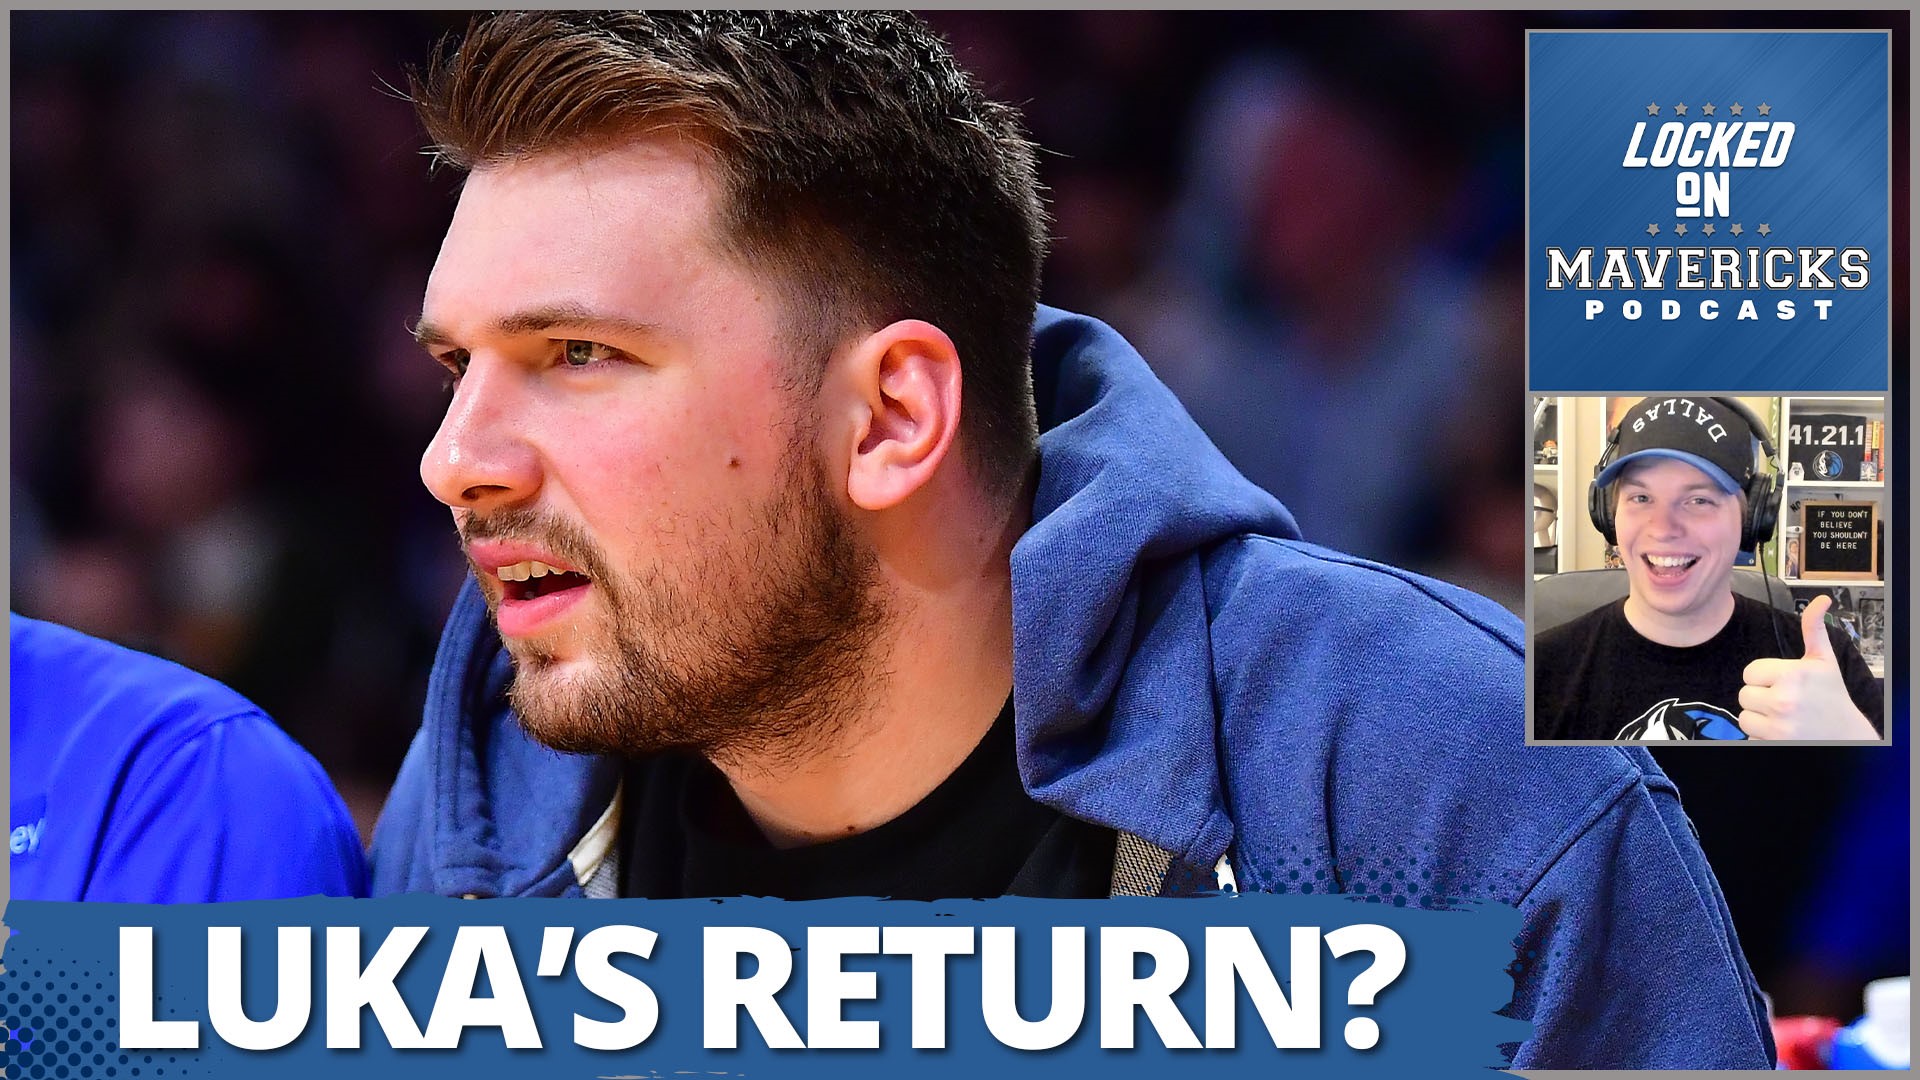 Nick Angstadt breaks down what Luka Doncic's return could mean for the Mavs, Dallas' Playoff scenarios with 11 games left, and how Kyrie Irving has paired with Luka.